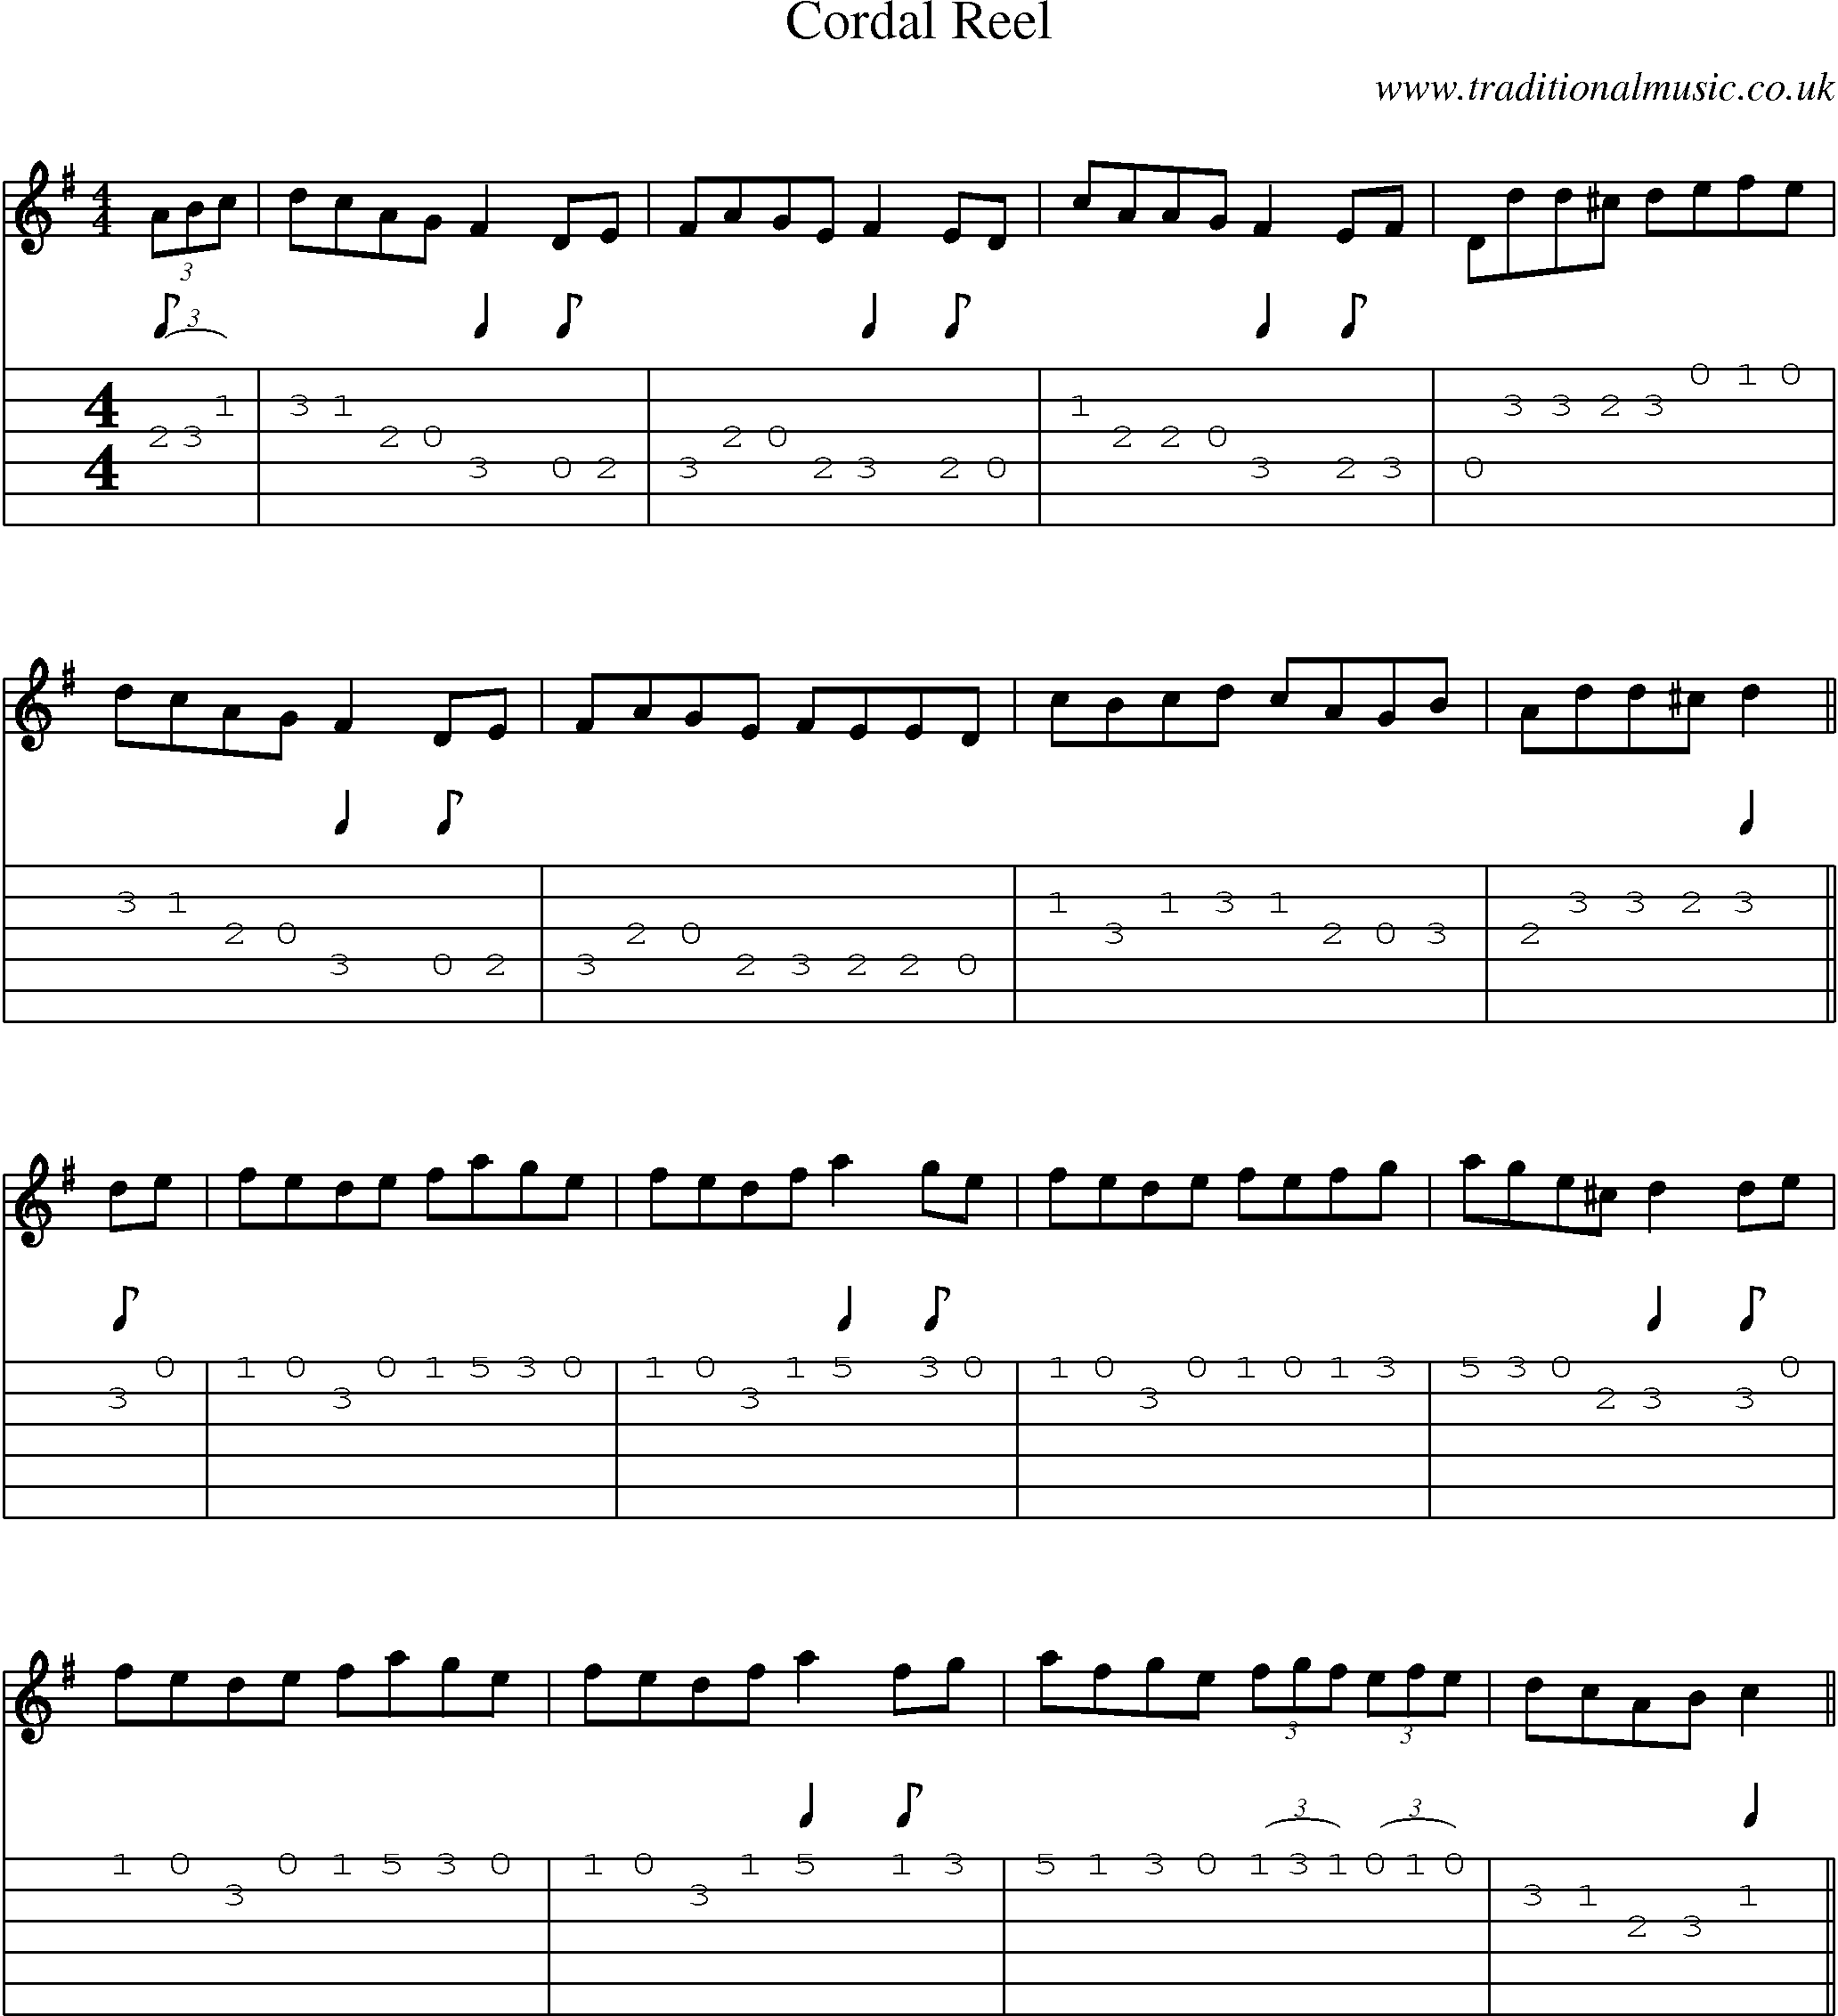 Music Score and Guitar Tabs for Cordal Reel